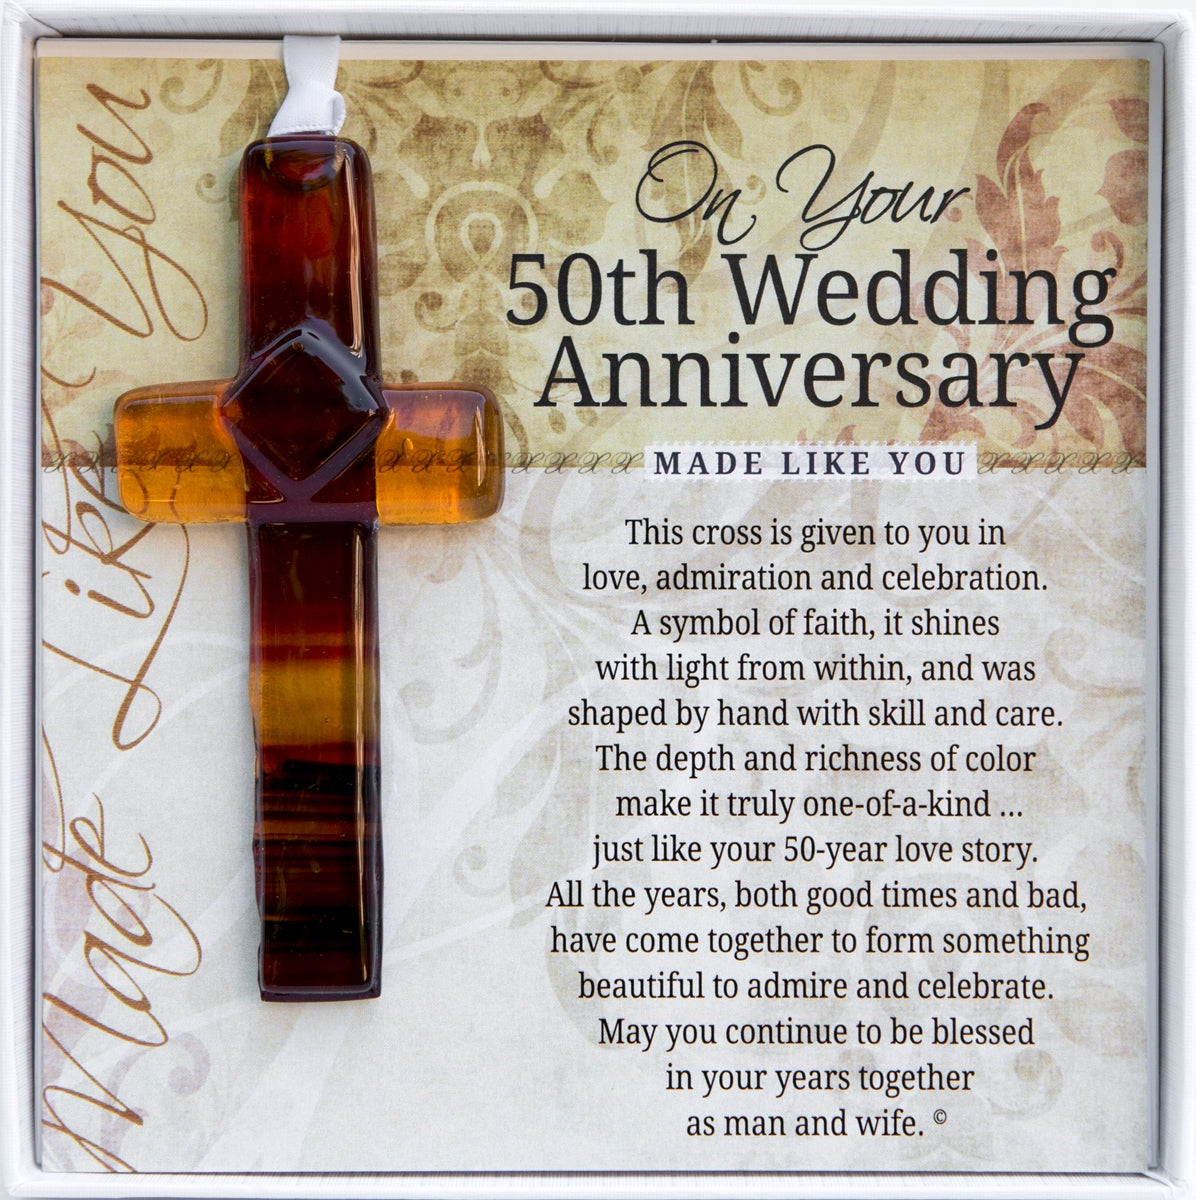 50th Anniversary Gift - Handmade 4" amber/brown glass cross and "On Your 50th Wedding Anniversary" sentiment in white box with clear lid